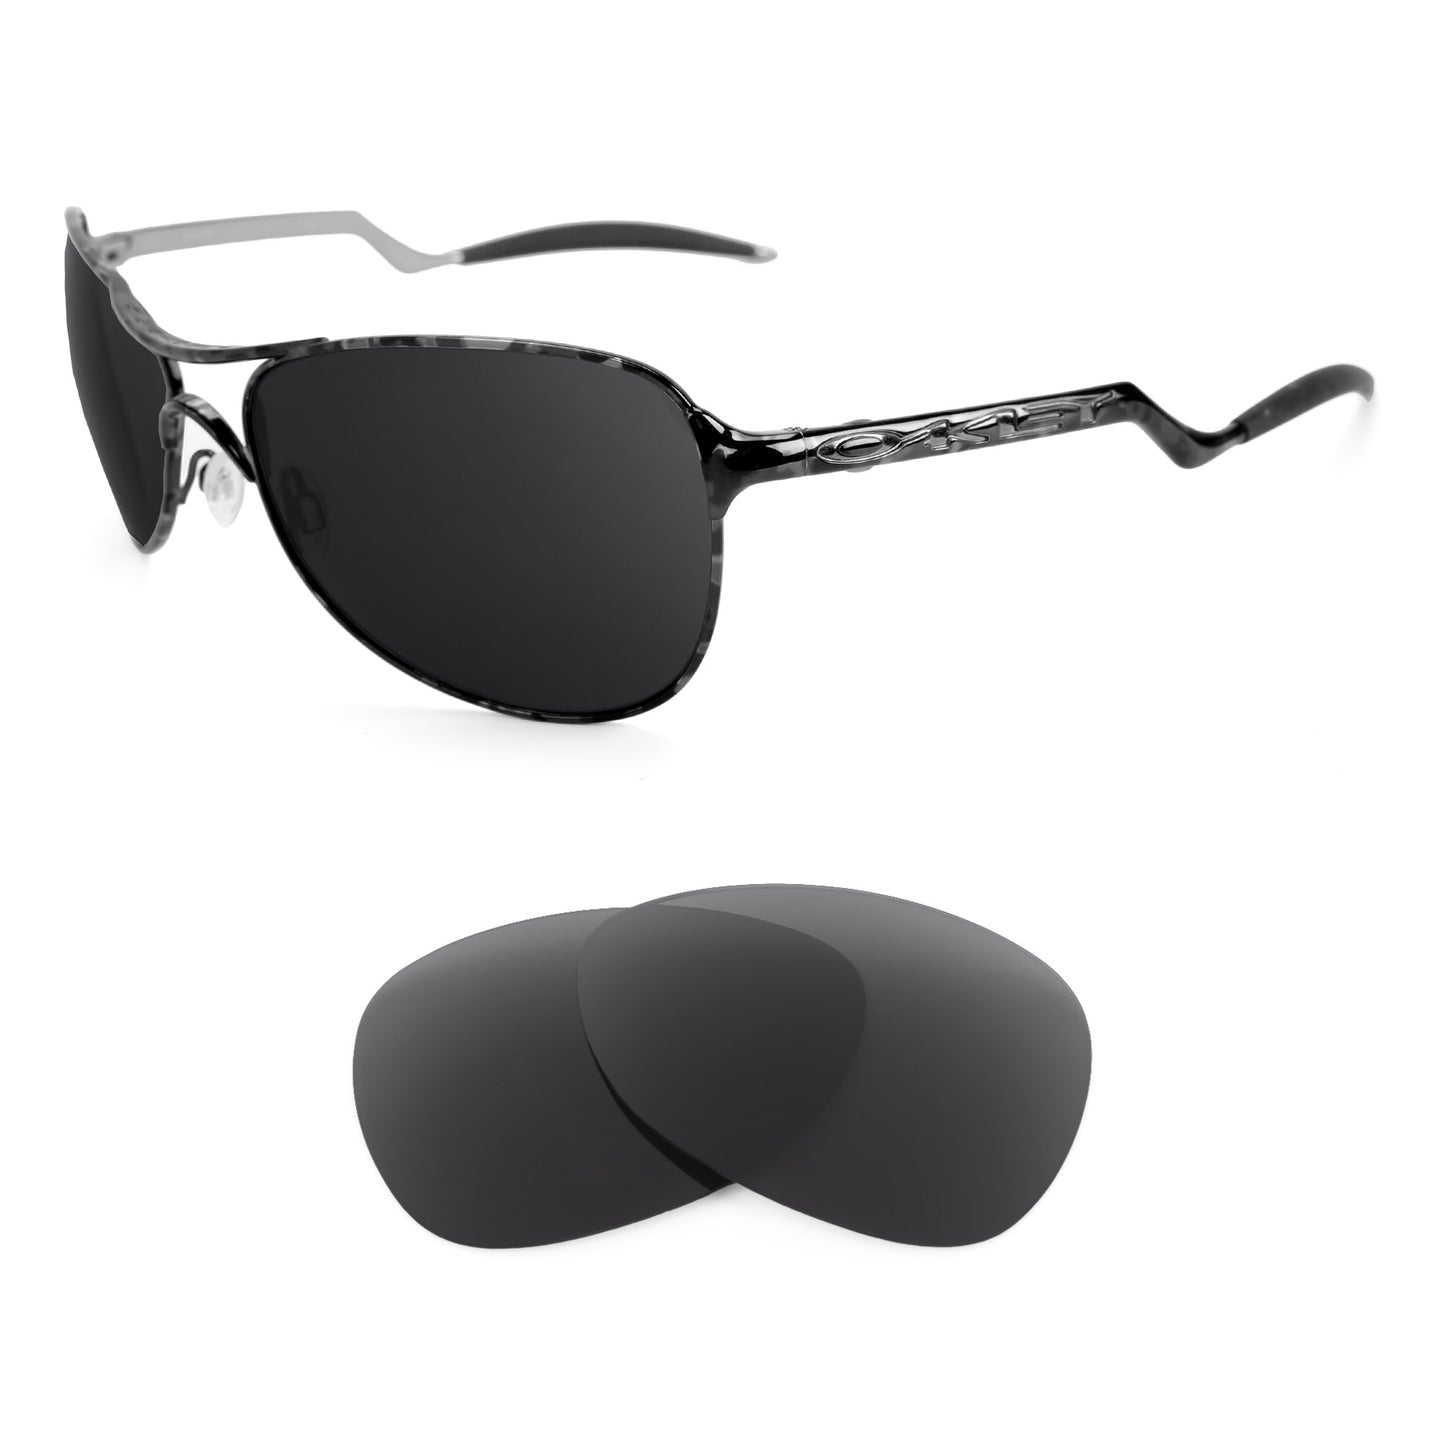 Oakley Warden sunglasses with replacement lenses